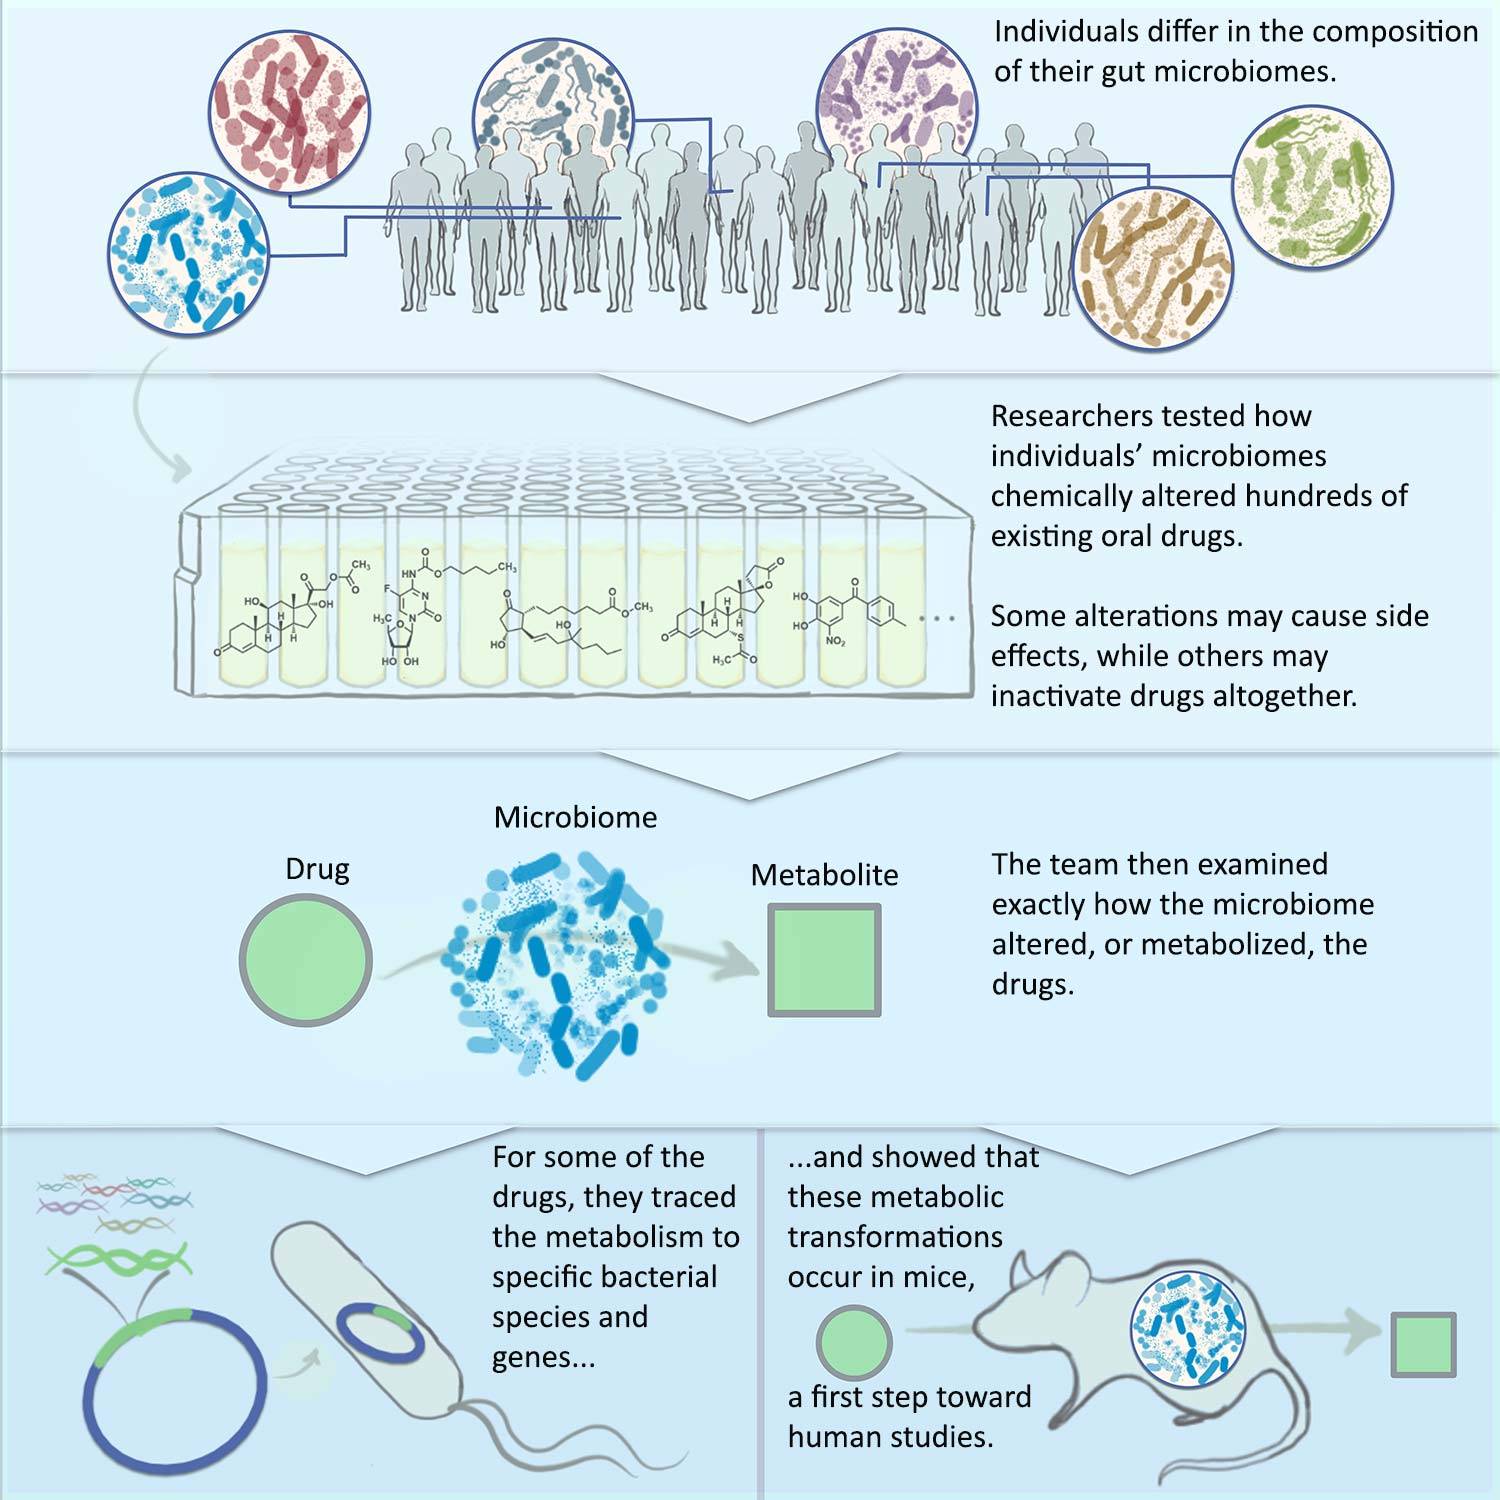 Individuals differ in the composition of their gut microbiomes. Researchers tested how individuals' microbiomes chemically altered hundreds of existing hundreds of existing oral drugs. Some alterations may cause side effects while others may inactivate drugs altogether. The team then examined exactly how For some of the drugs, they traced the metabolism to specific bacterial species and genes and showed that these metabbolic transformations occur in mice, a first step toward human studies.